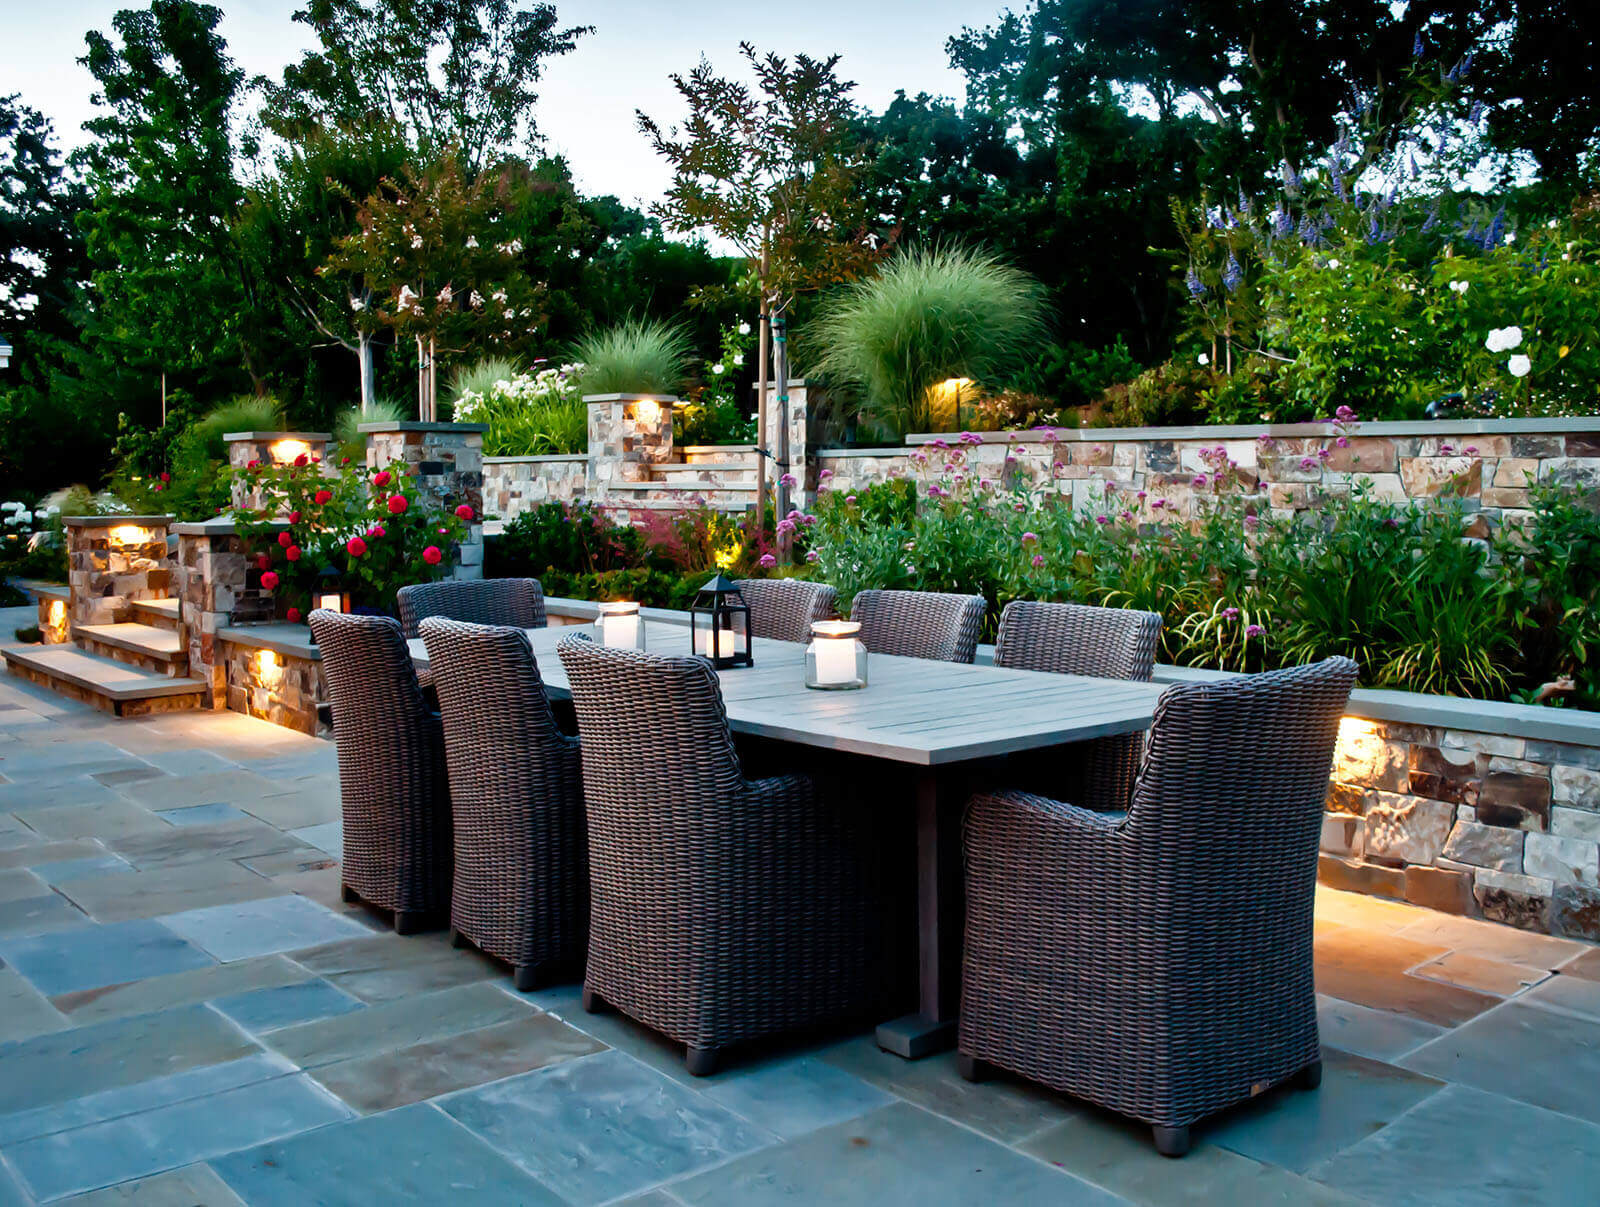 Open laid stone patio with outdoor furniture and staged garden - ambient lighting